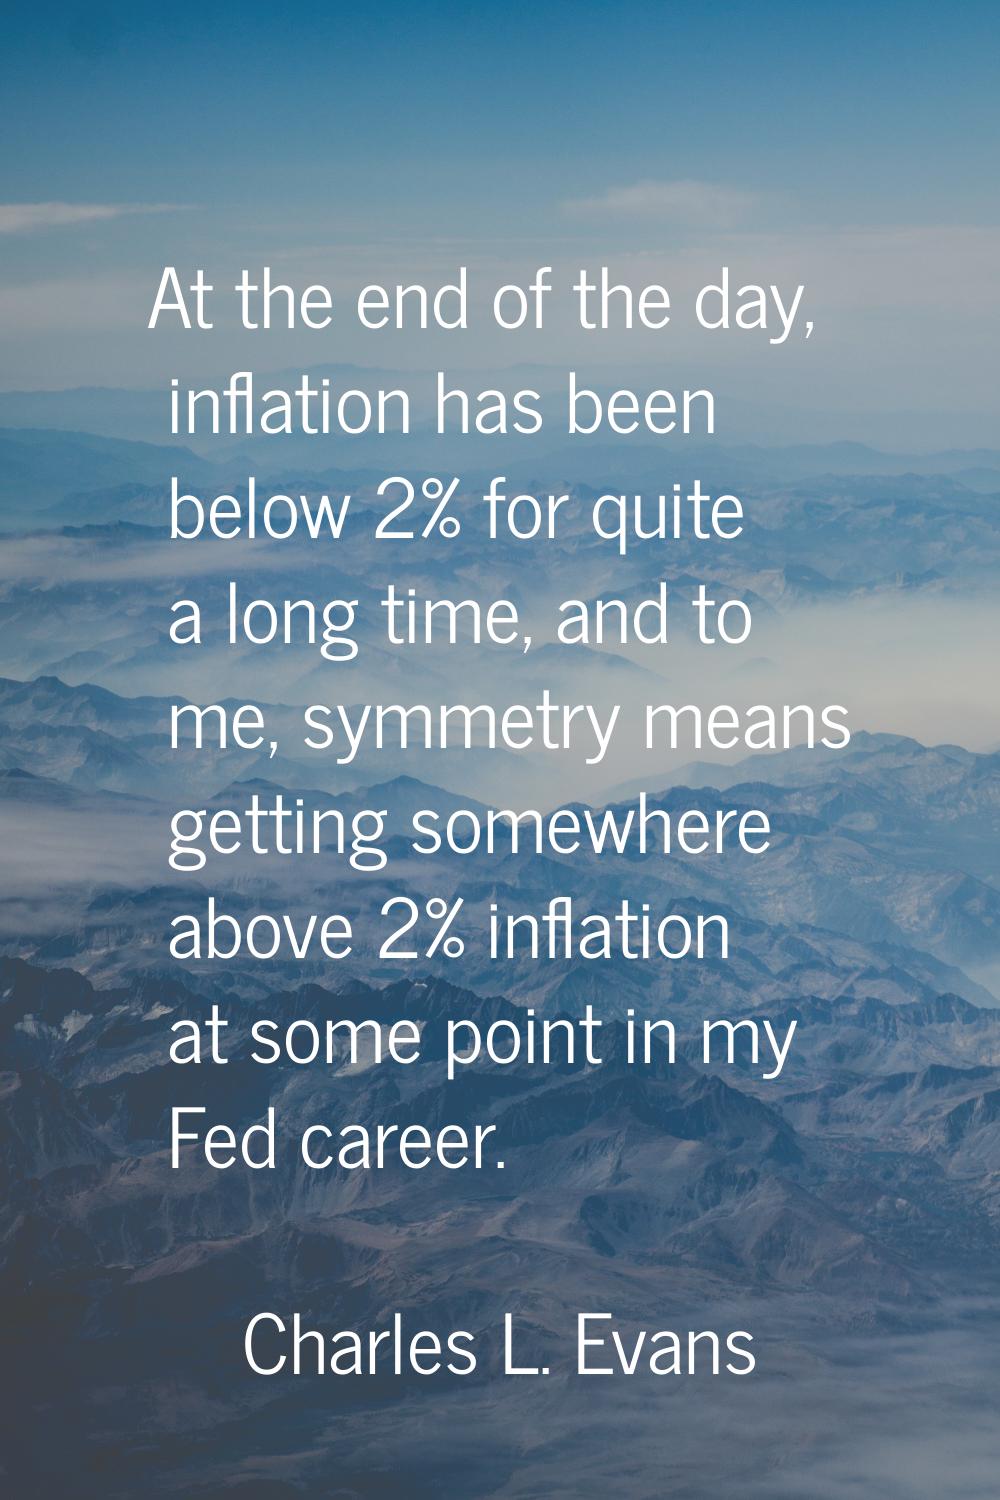 At the end of the day, inflation has been below 2% for quite a long time, and to me, symmetry means